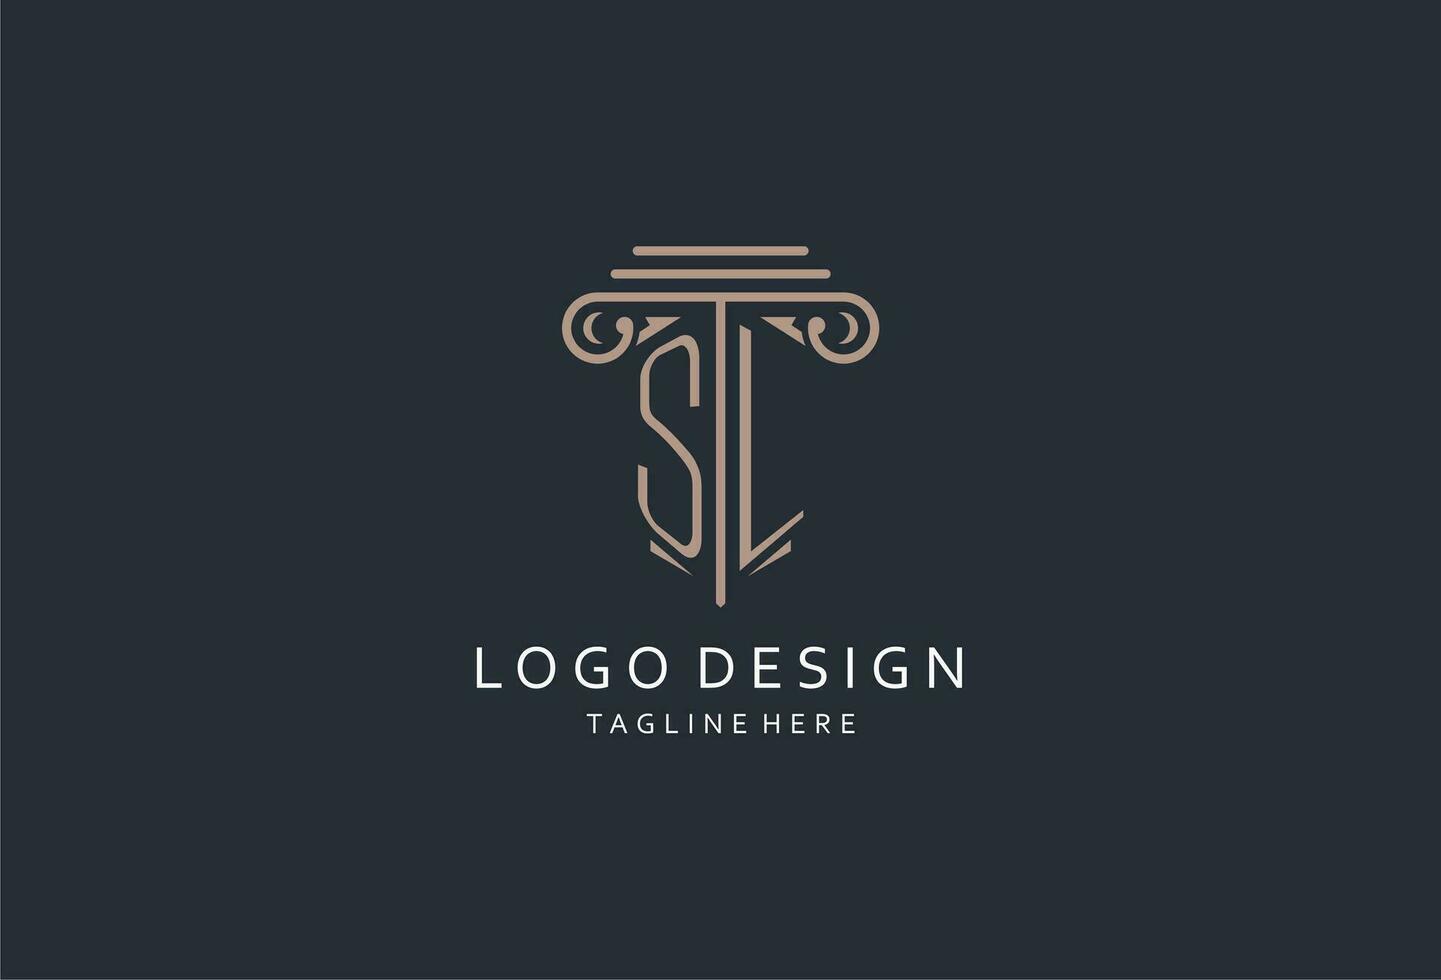 SL monogram logo with pillar shape icon, luxury and elegant design logo for law firm initial style logo vector